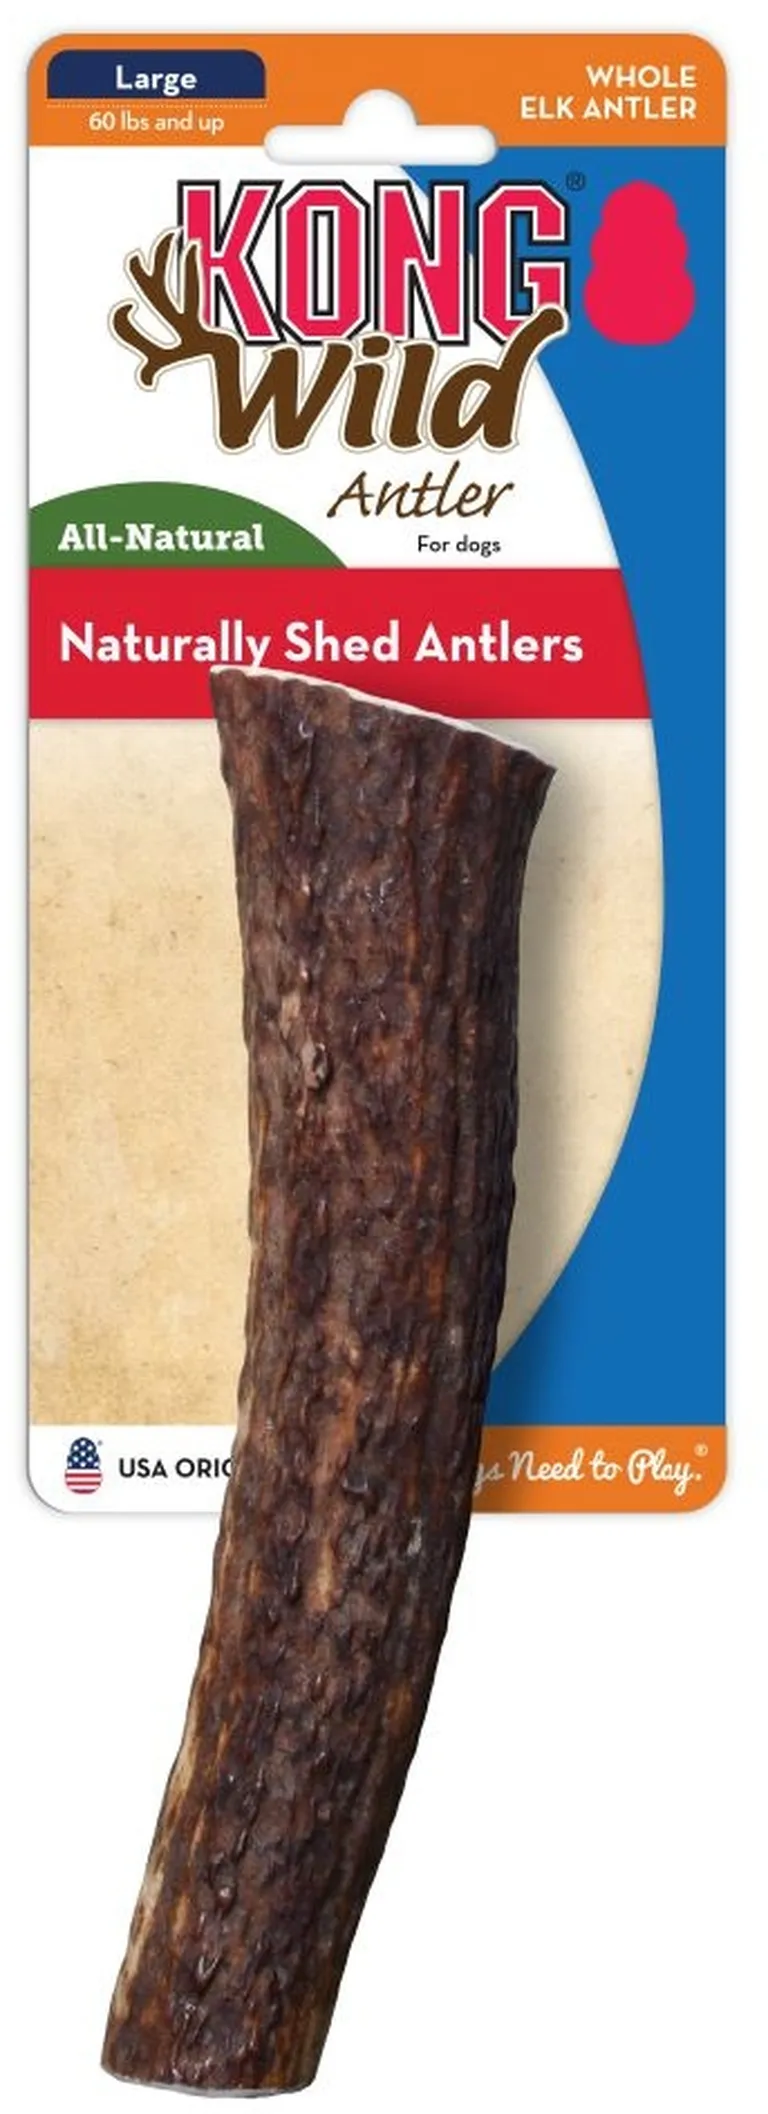 KONG Wild Whole Elk Antler for Dogs Large Photo 1